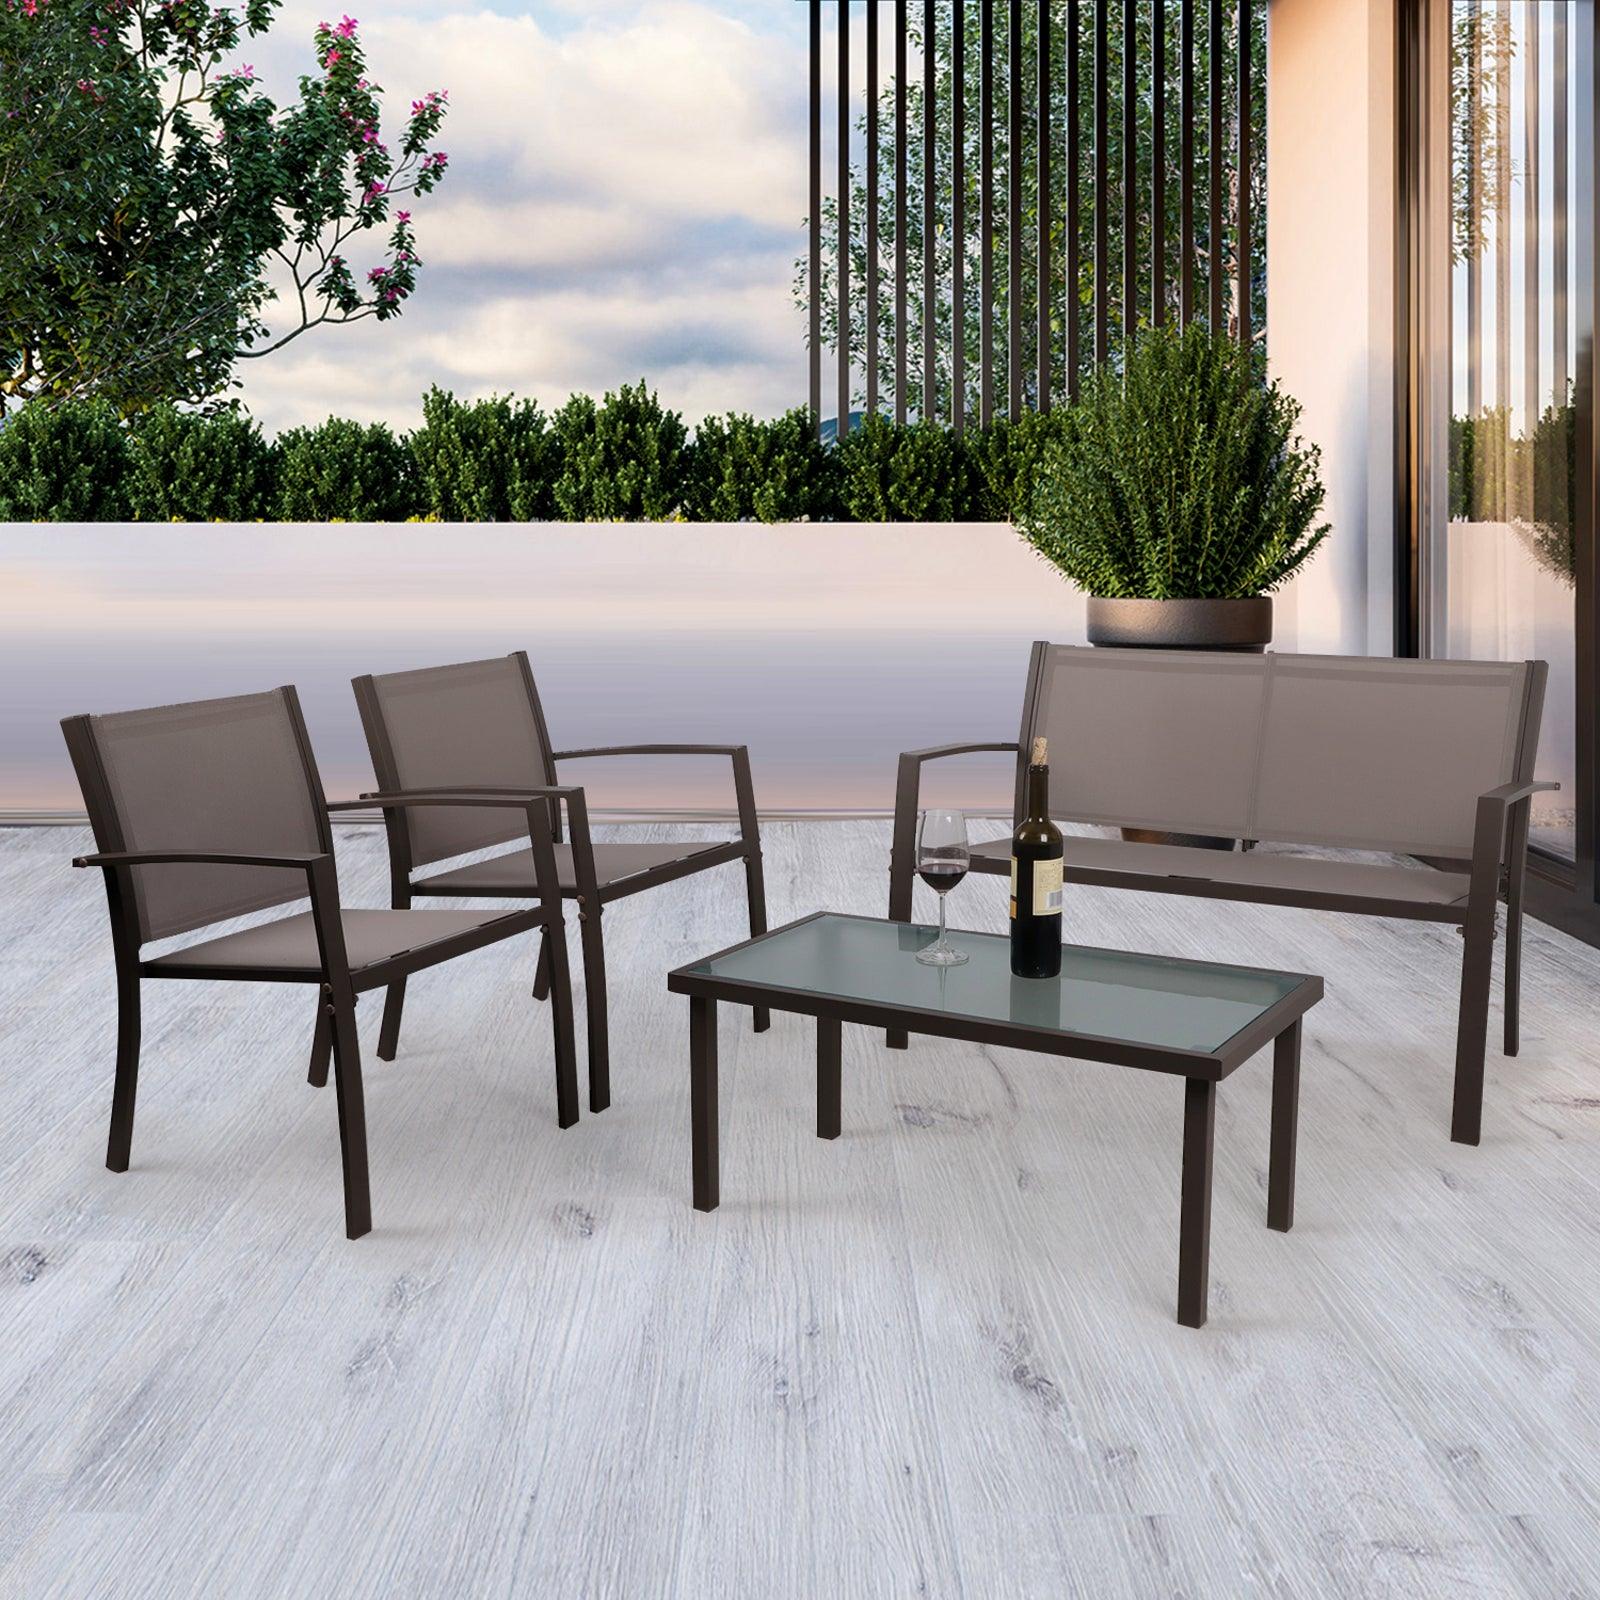 Brown Garden Furniture 4 Piece Set - Glass Coffee Table, 2 Textilene Armchairs, 1 Double Seat Sofa - Charming Spaces